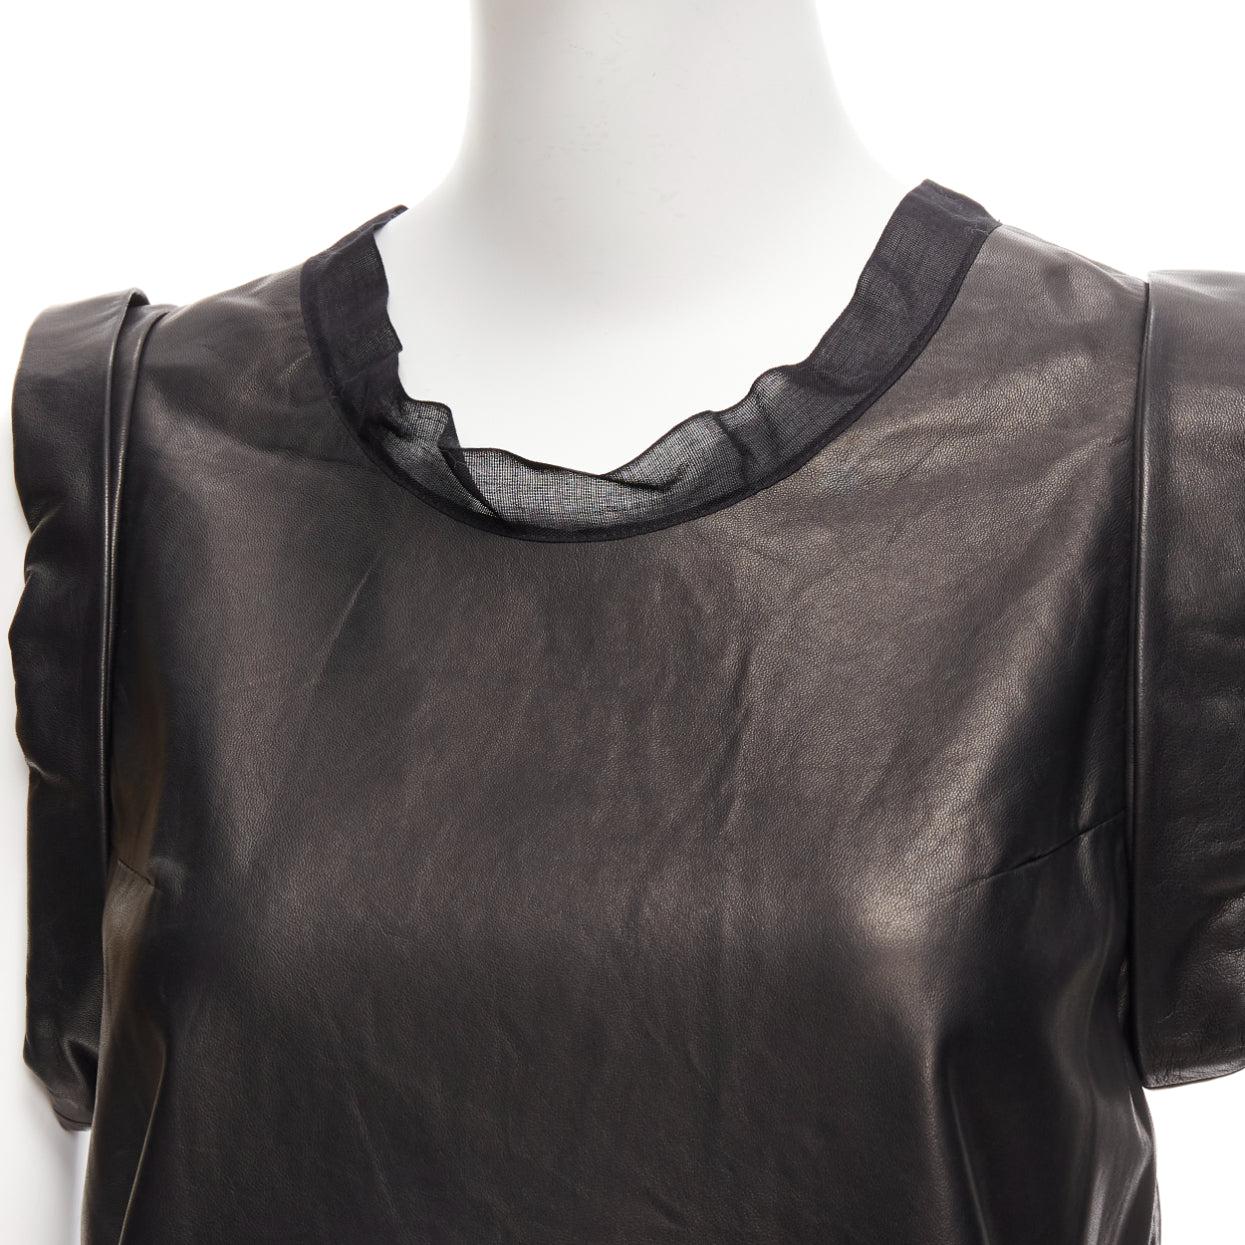 3.1 PHILLIP LIM black leather sheer silk trim folded sleeves tunic top US2 S
Reference: NILI/A00037
Brand: 3.1 Phillip Lim
Designer: Phillip Lim
Material: Leather, Silk
Color: Black
Pattern: Solid
Closure: Slip On
Lining: Black Silk
Extra Details: